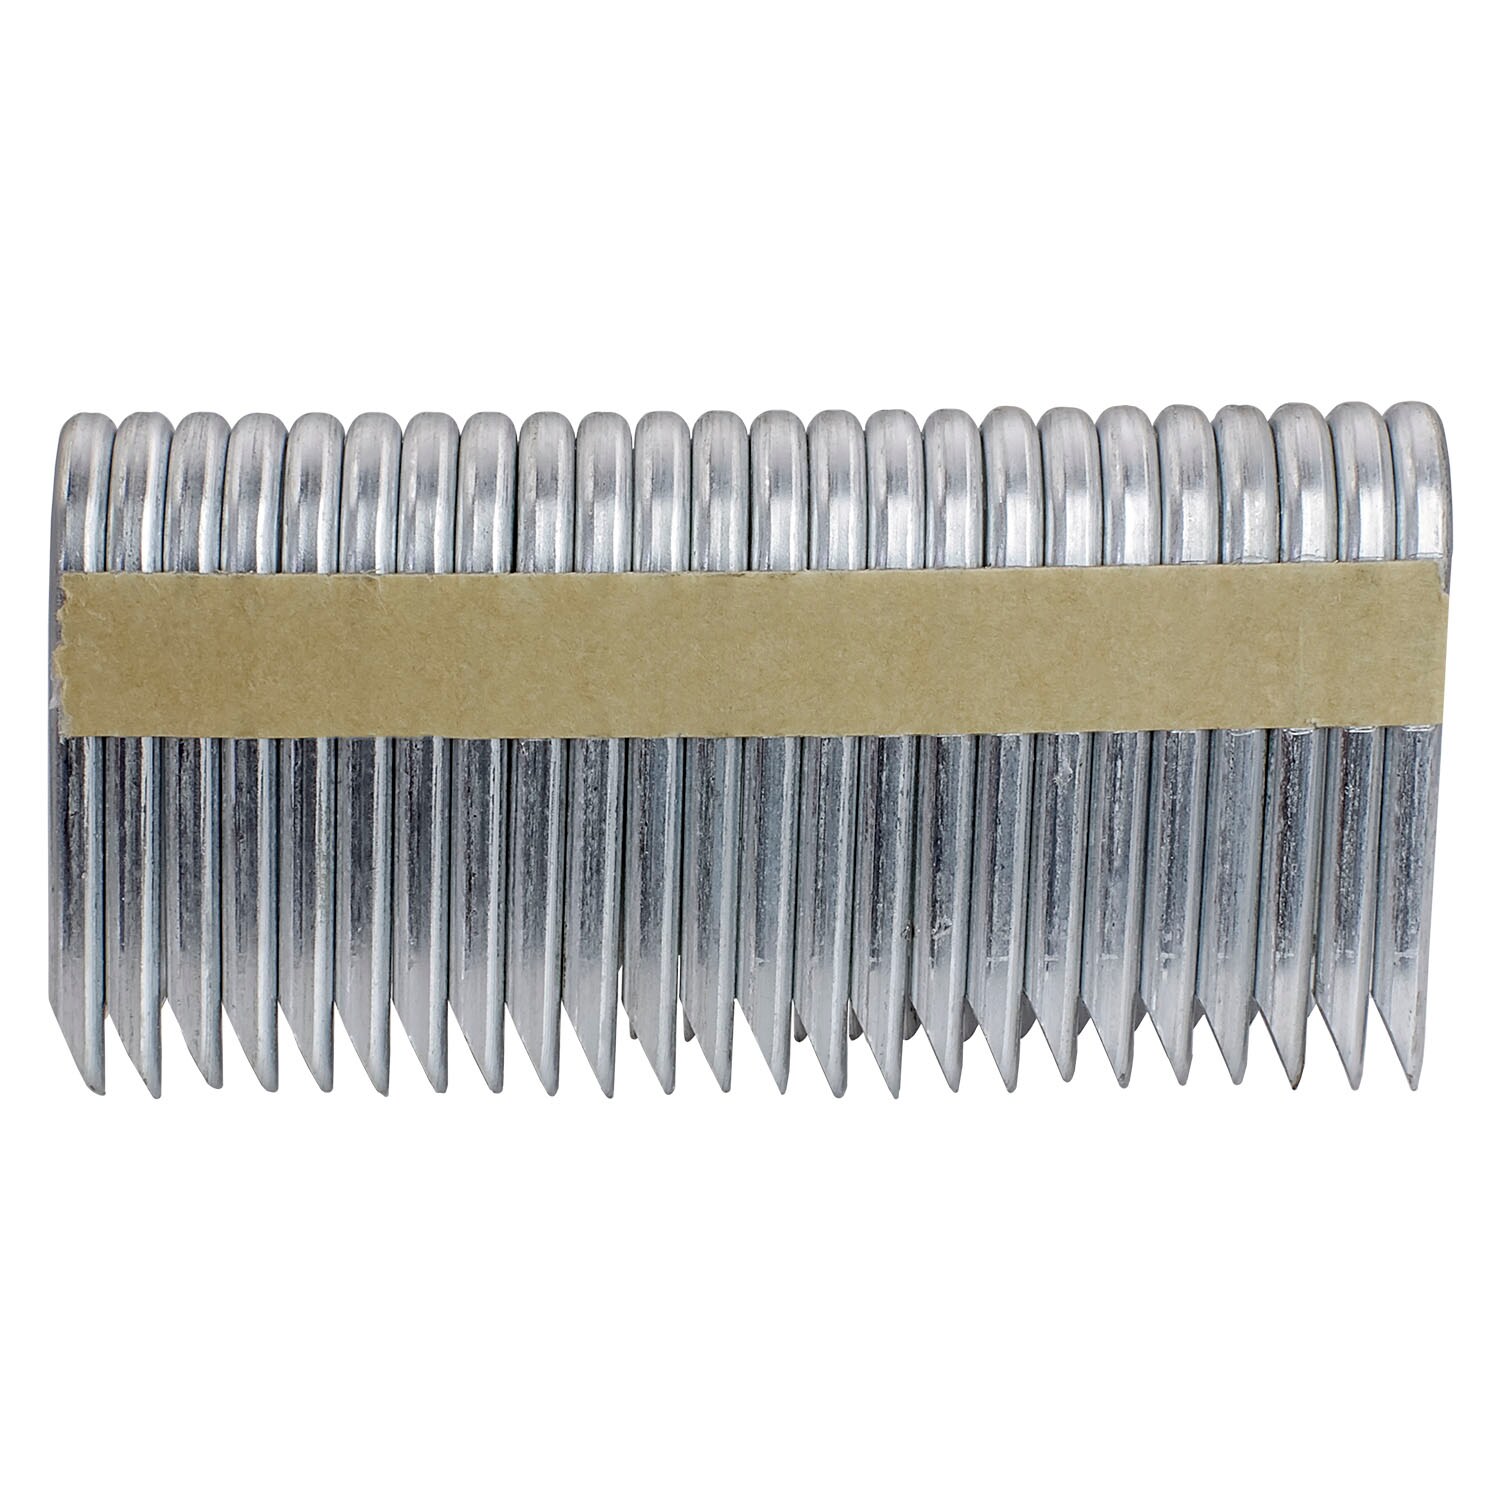 Freeman FS9G1K2 9-Gauge 2 Paper Collated Fencing Staples 1000 count